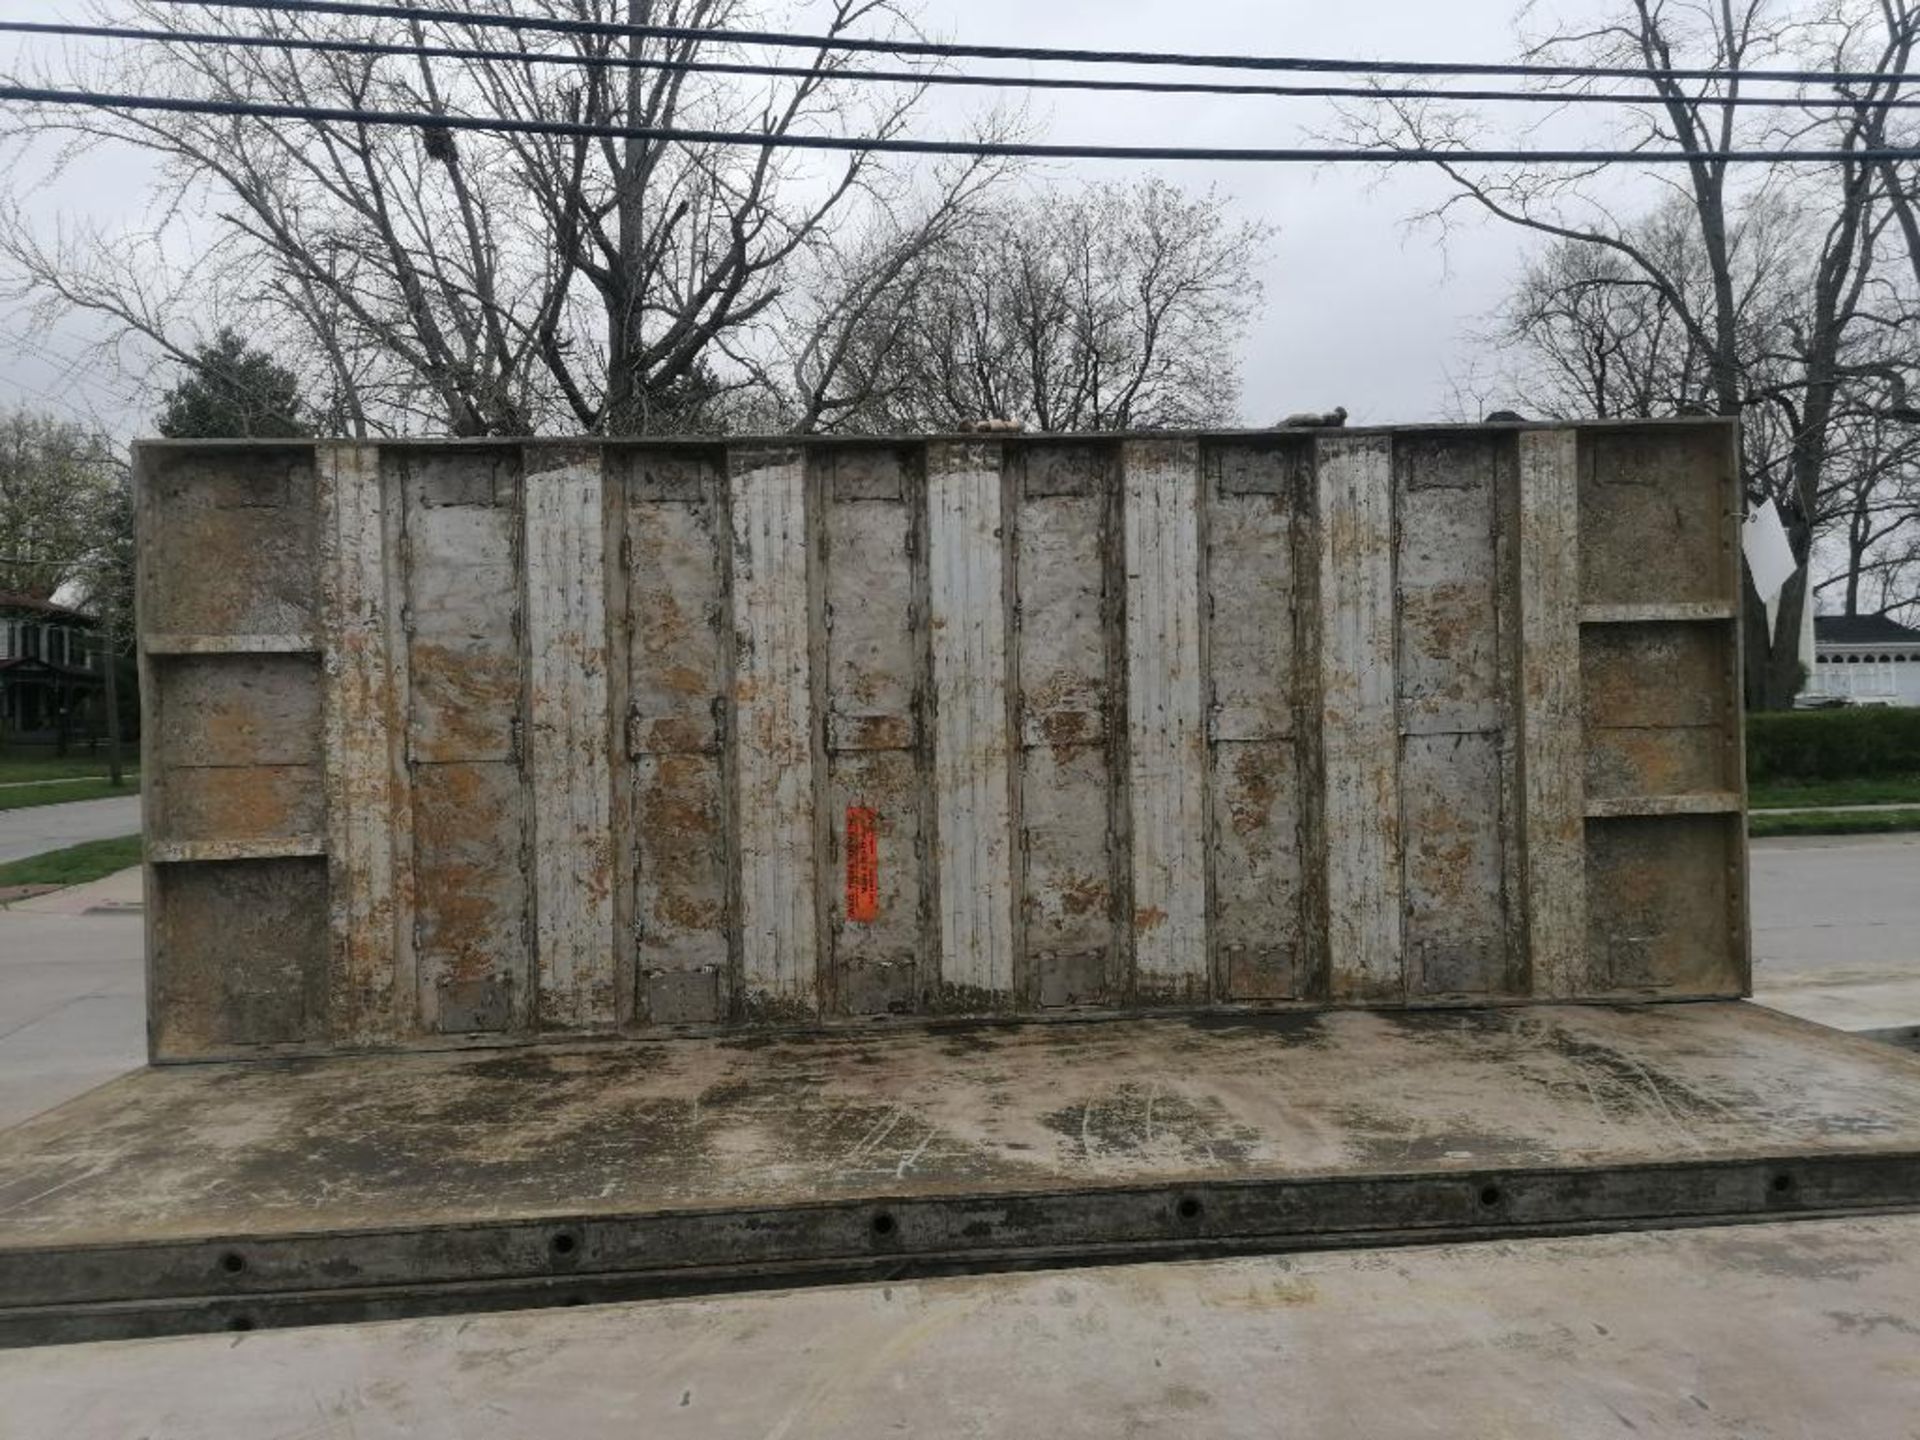 (20) 3' x 8' Wall-Ties Smooth Aluminum Concrete Forms 6-12 Hole Pattern. Located in Mt. Pleasant, - Image 8 of 8